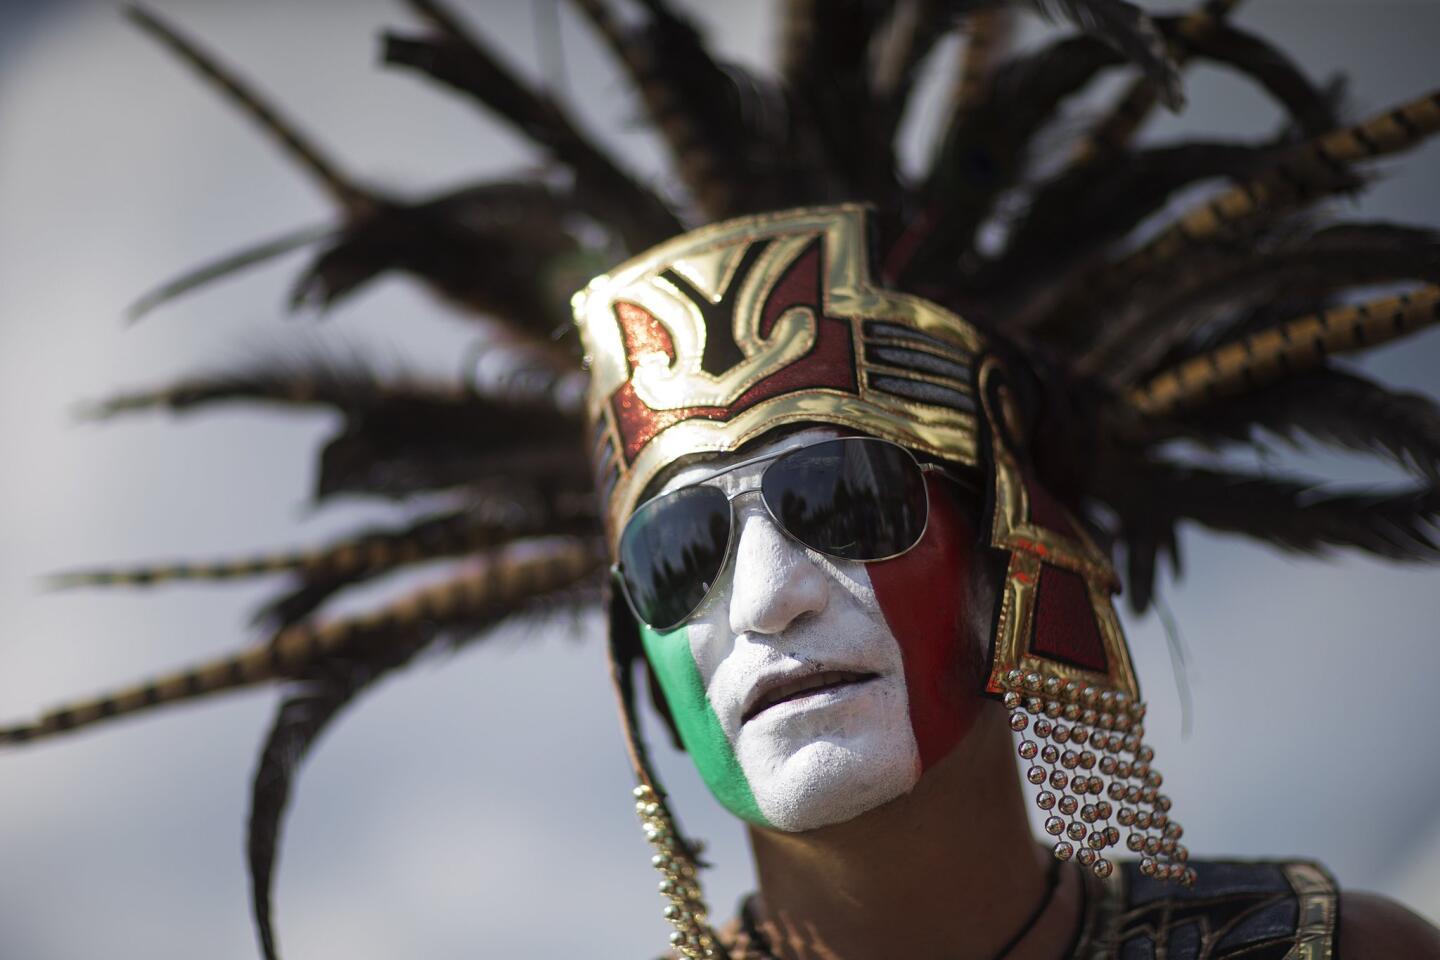 Luis Angel, of Jackson, Miss., is dressed up as an Aztec Indian before the start of the CONCACAF Gold Cup semifinal playoff soccer games featuring Jamaica against the United States and Mexico against Panama Wednesday, July 22, 2015, in Atlanta. (AP Photo/David Goldman)